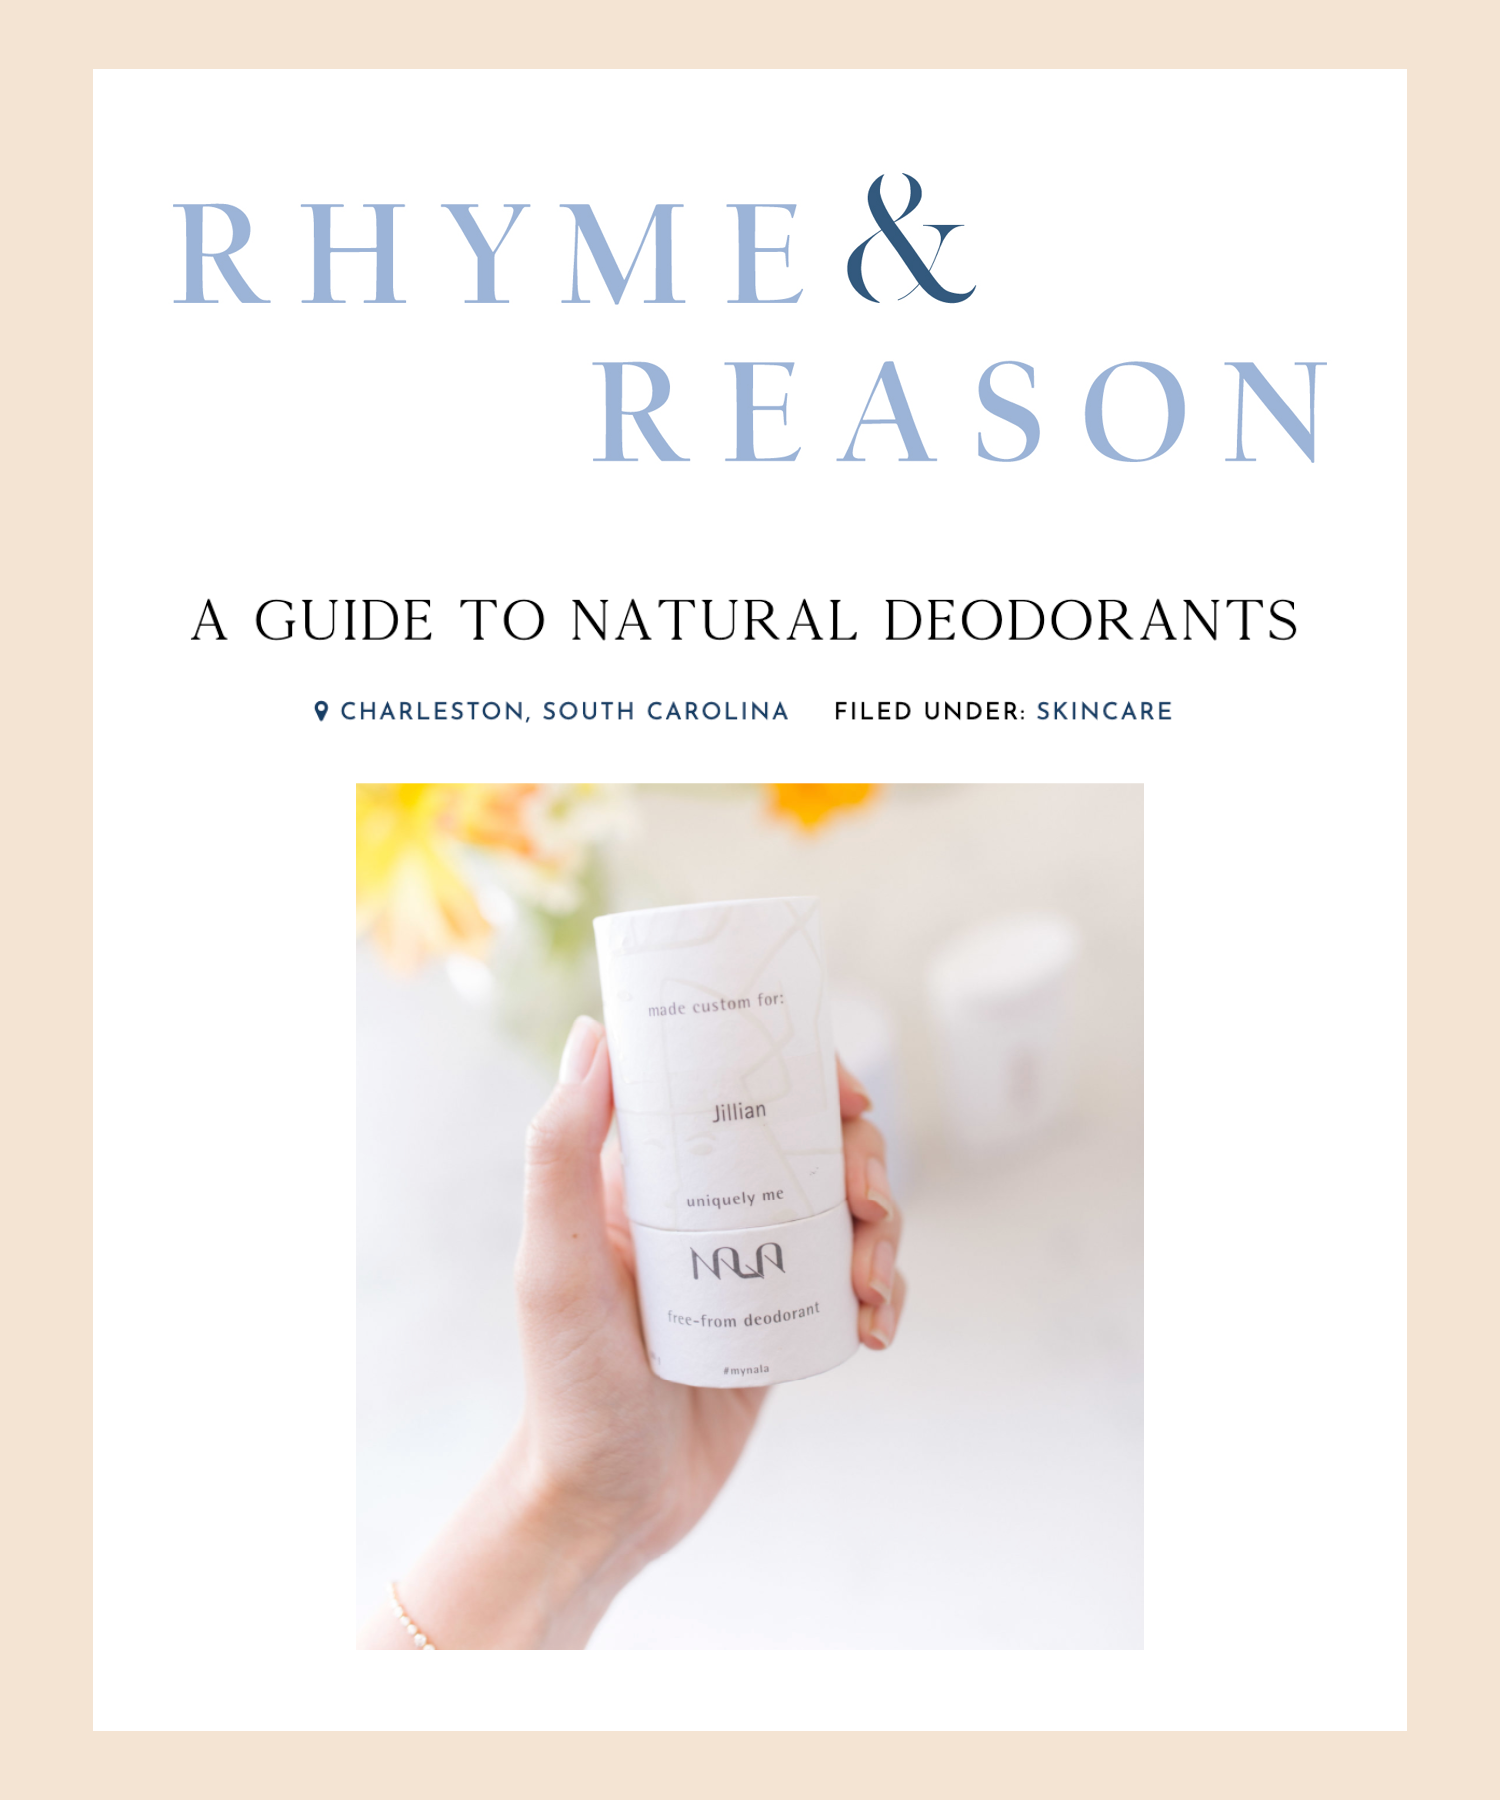 A Guide to Natural Deodorants